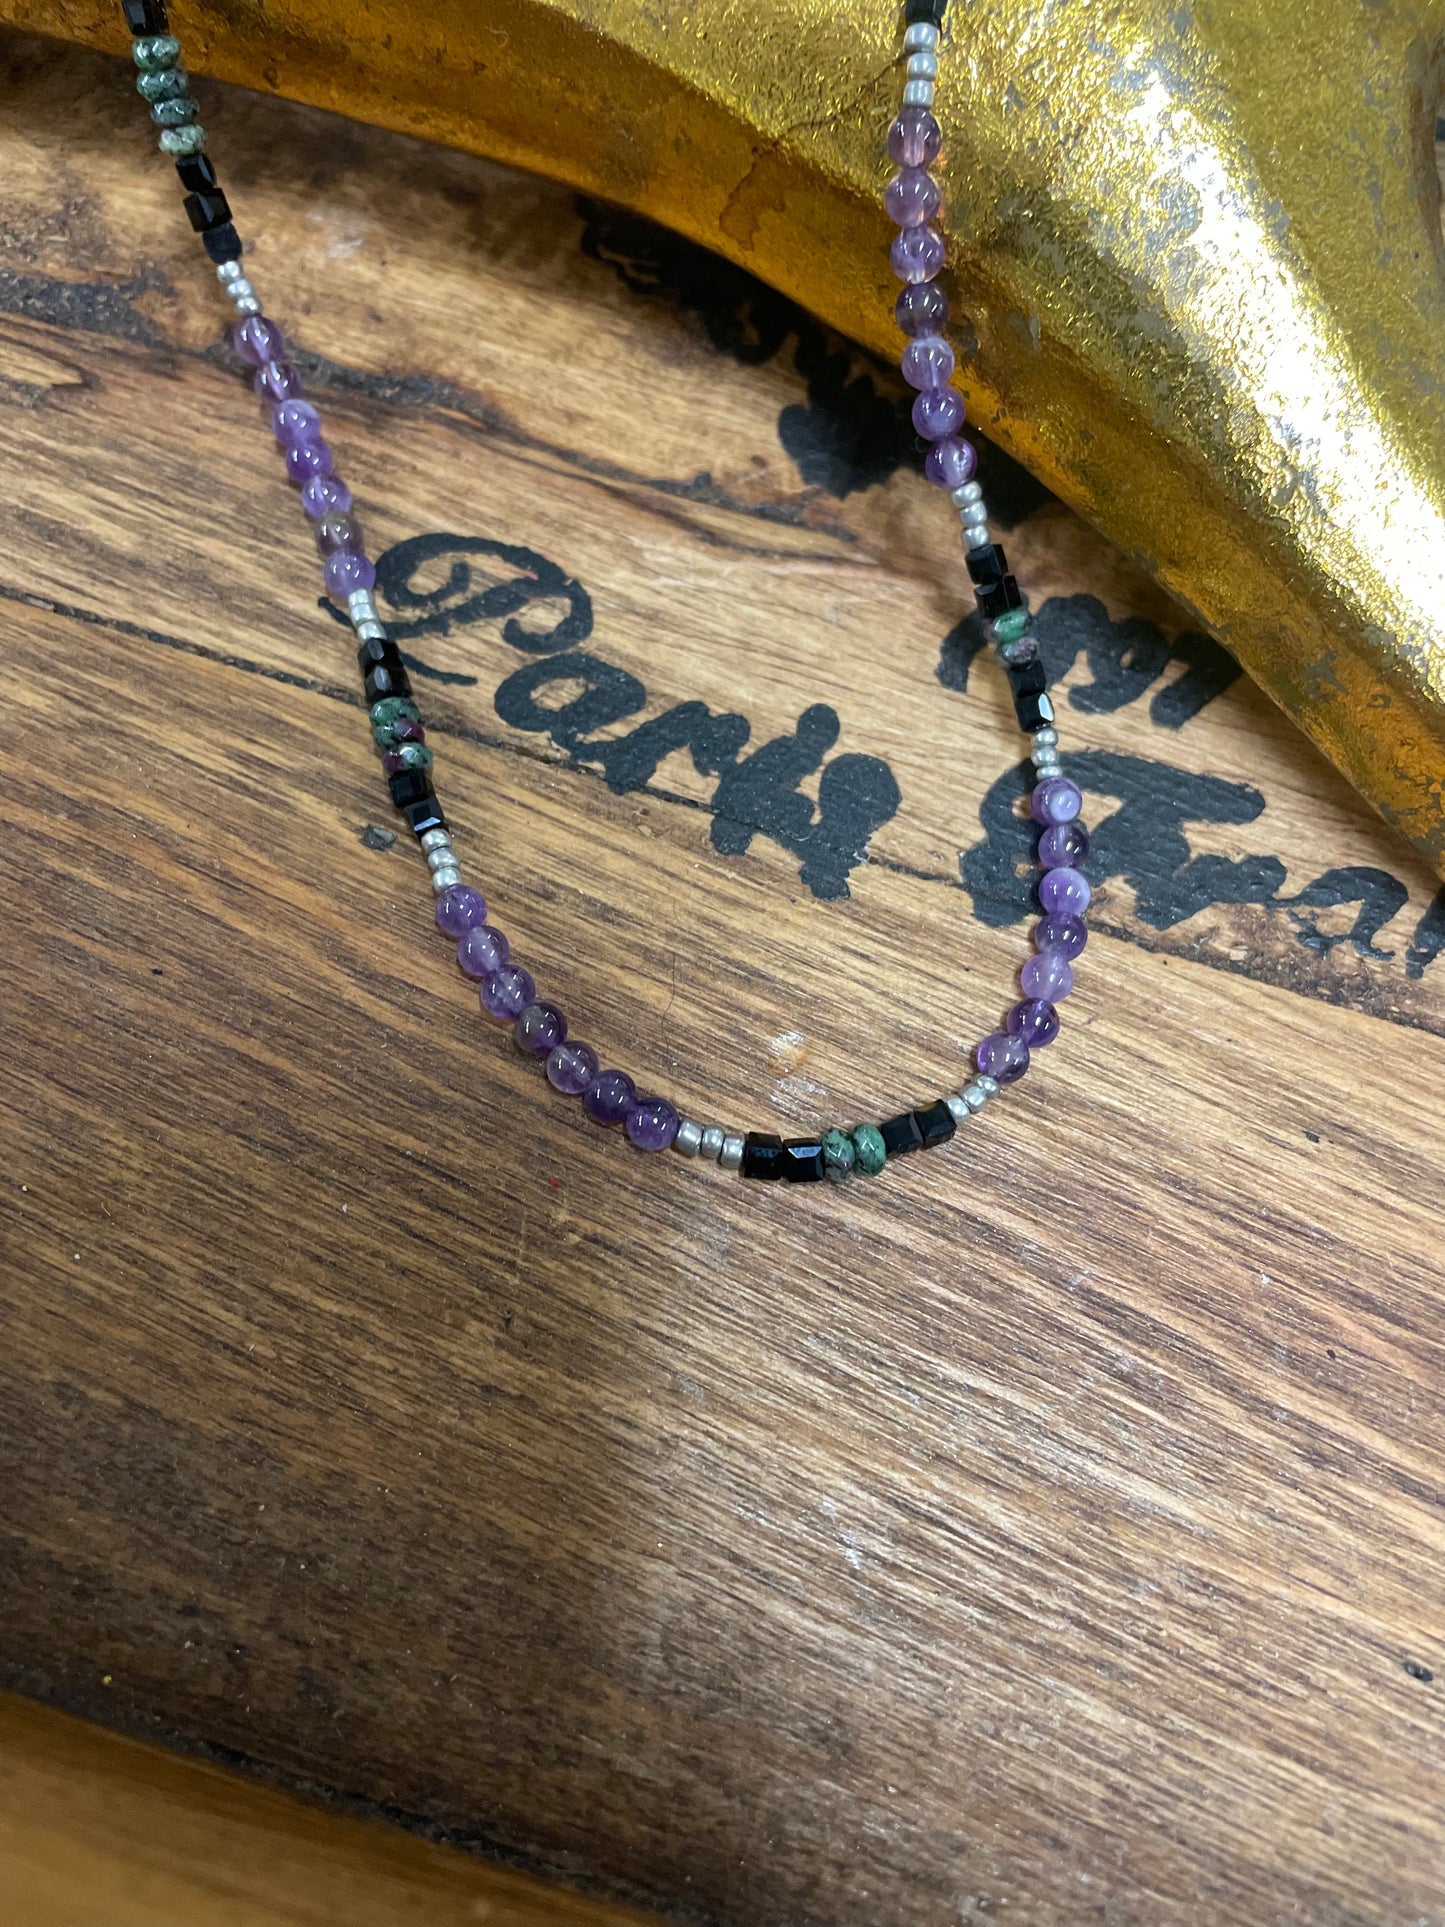 Sterling silver and raw stone necklace (amethyst, onyx, malachite, sterling beads